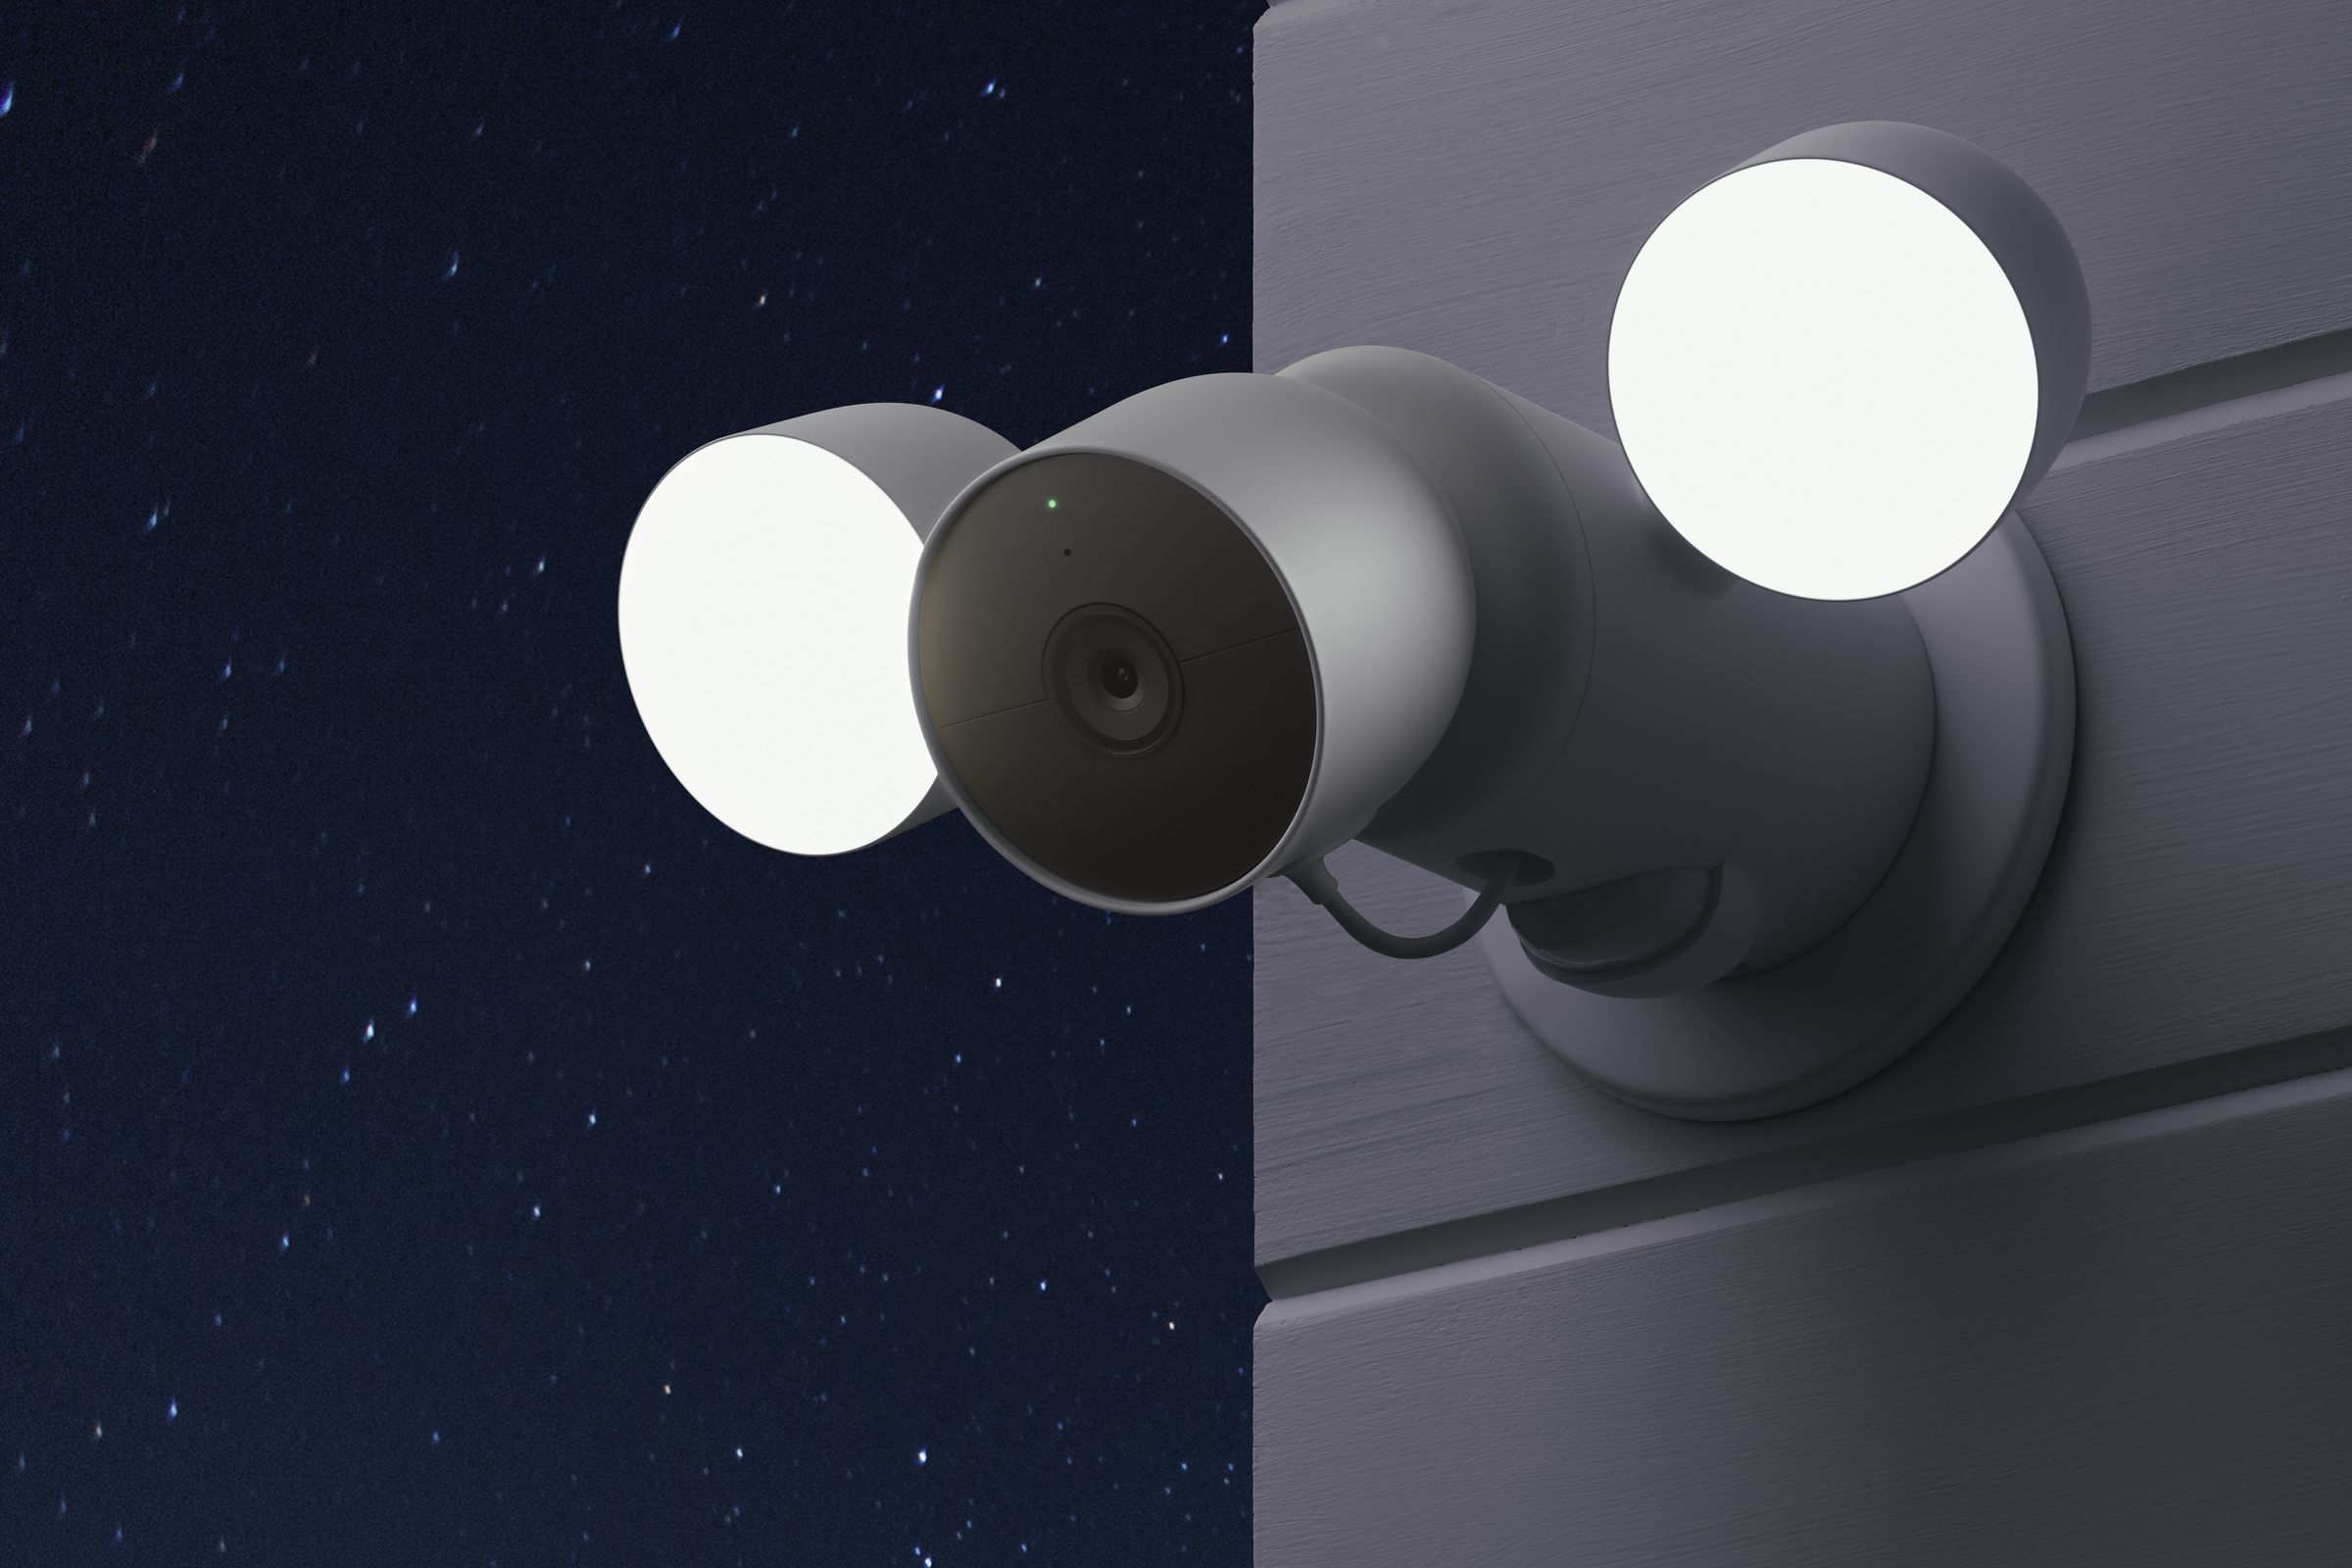 Google Nest’s first floodlight security camera is available to buy today.